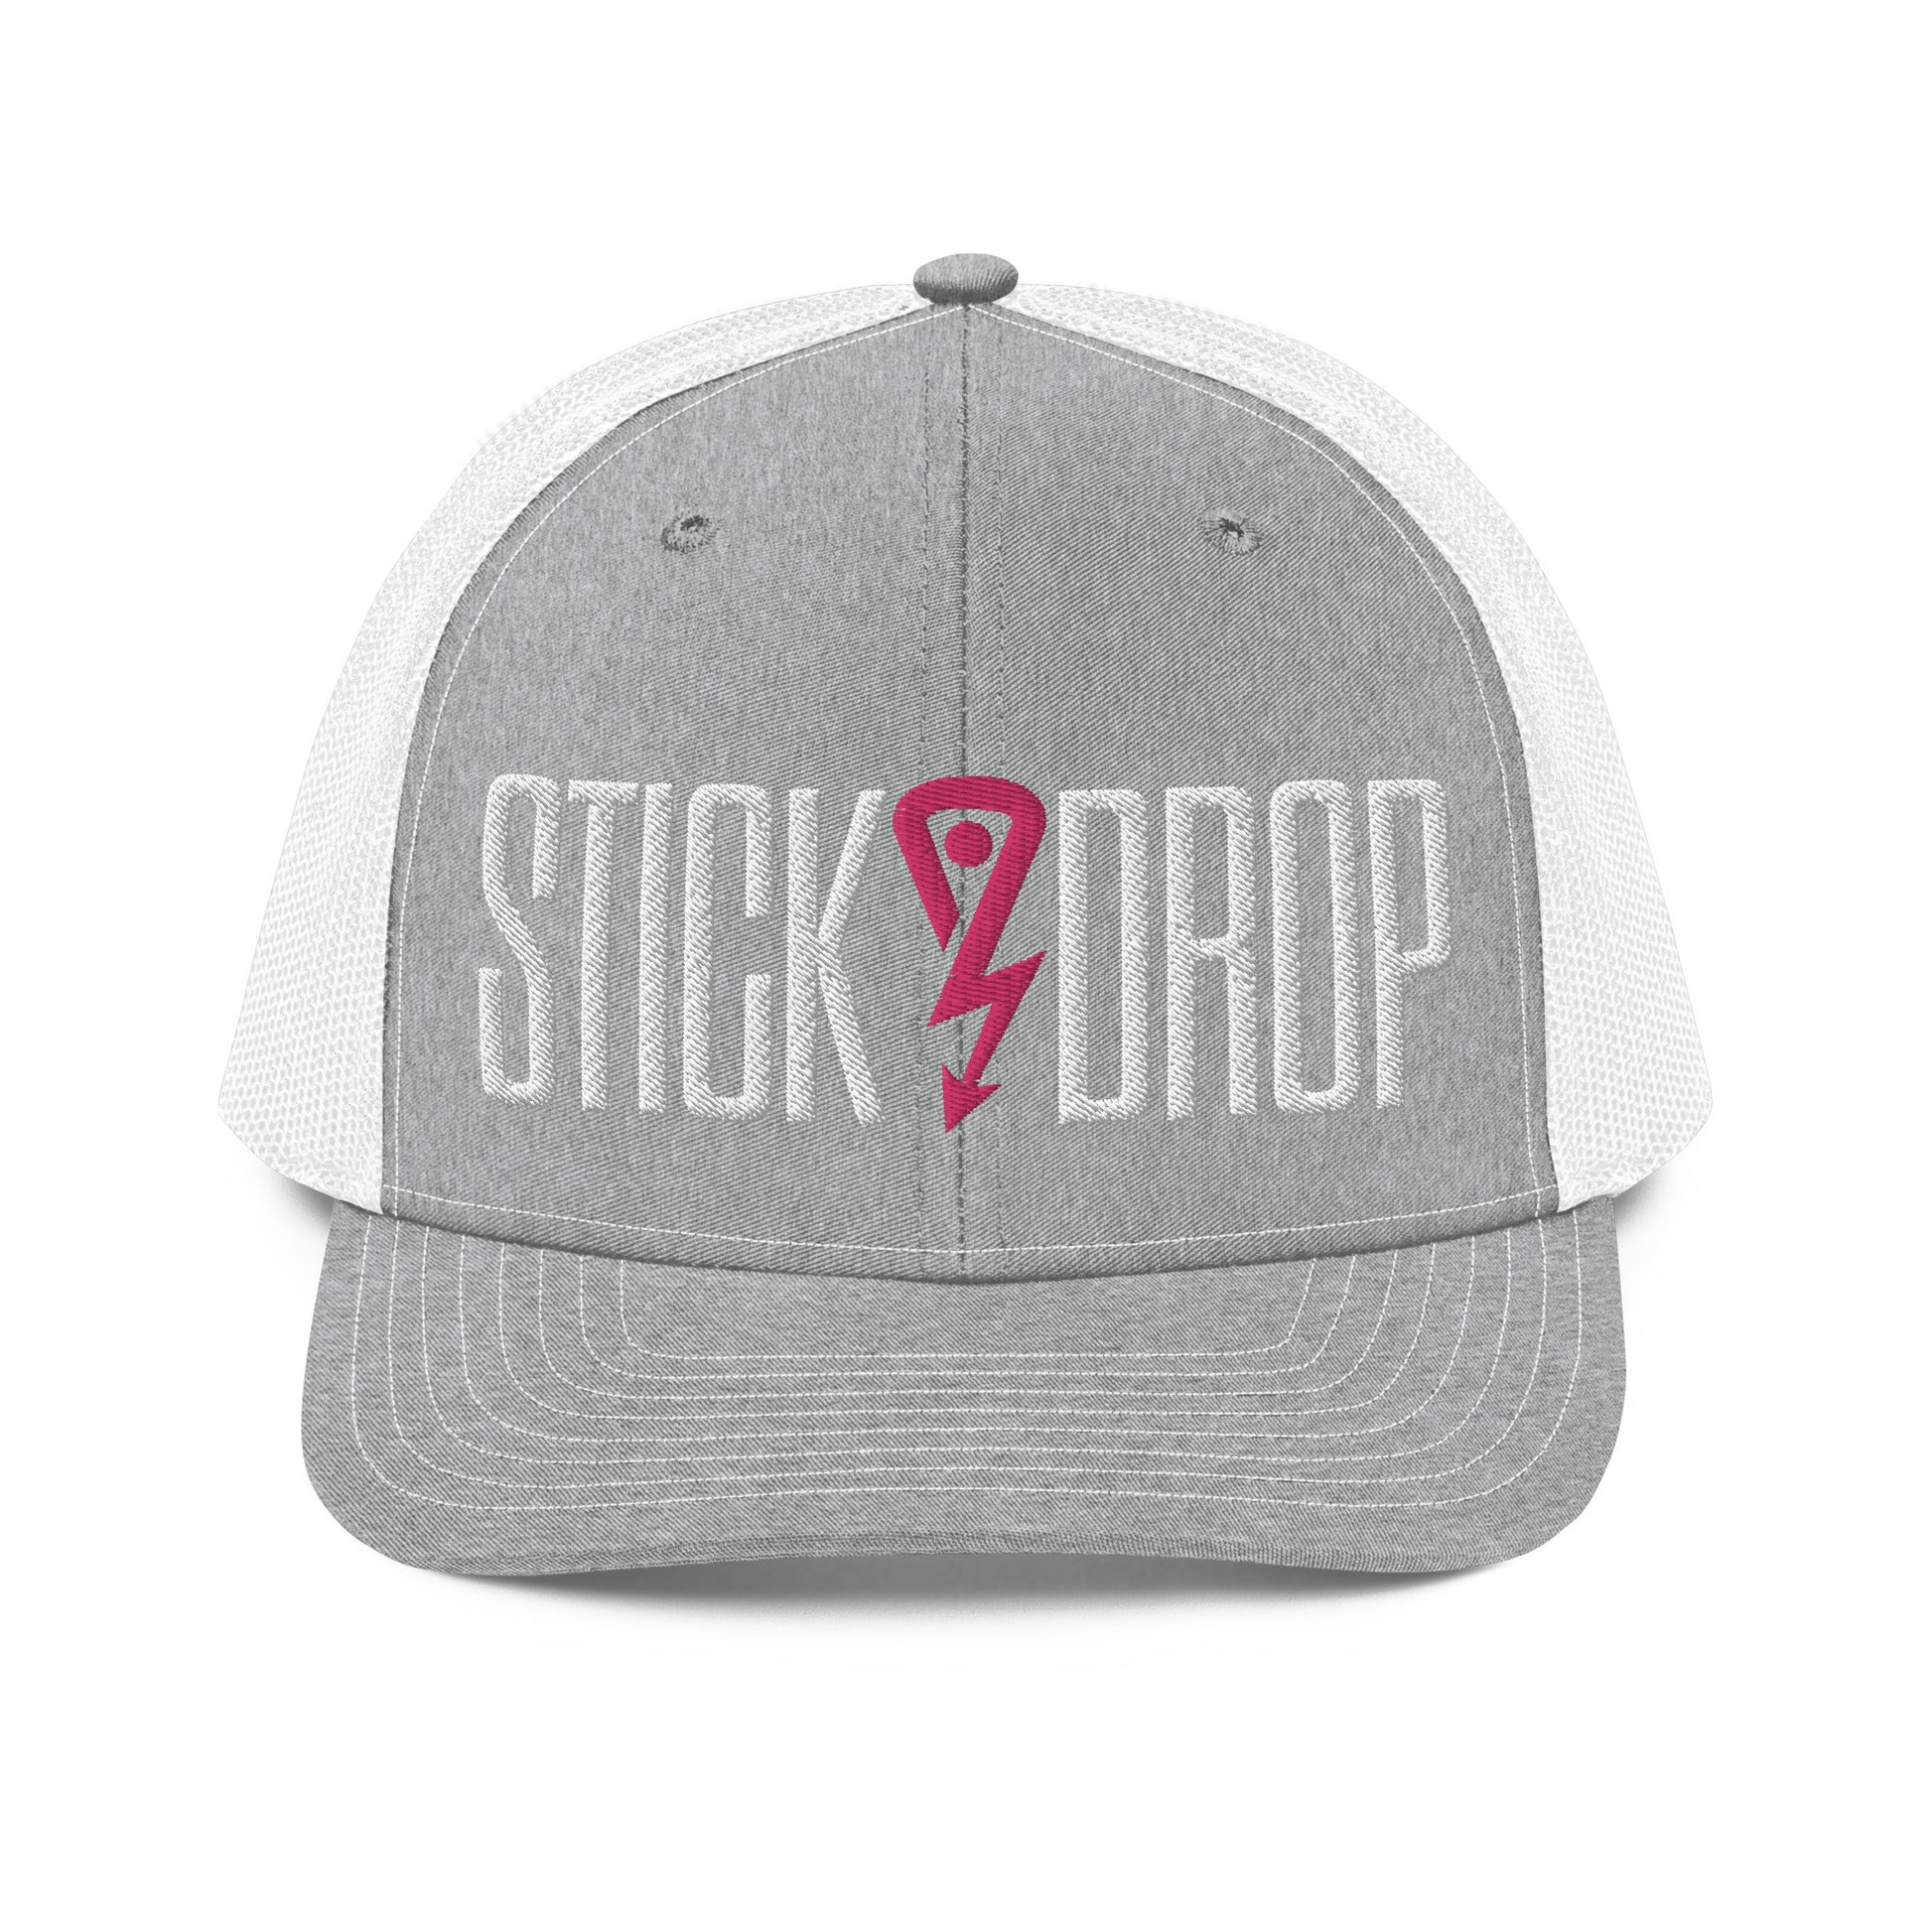 Gray Stick Drop Trucker Cap with white lettering and pink logo